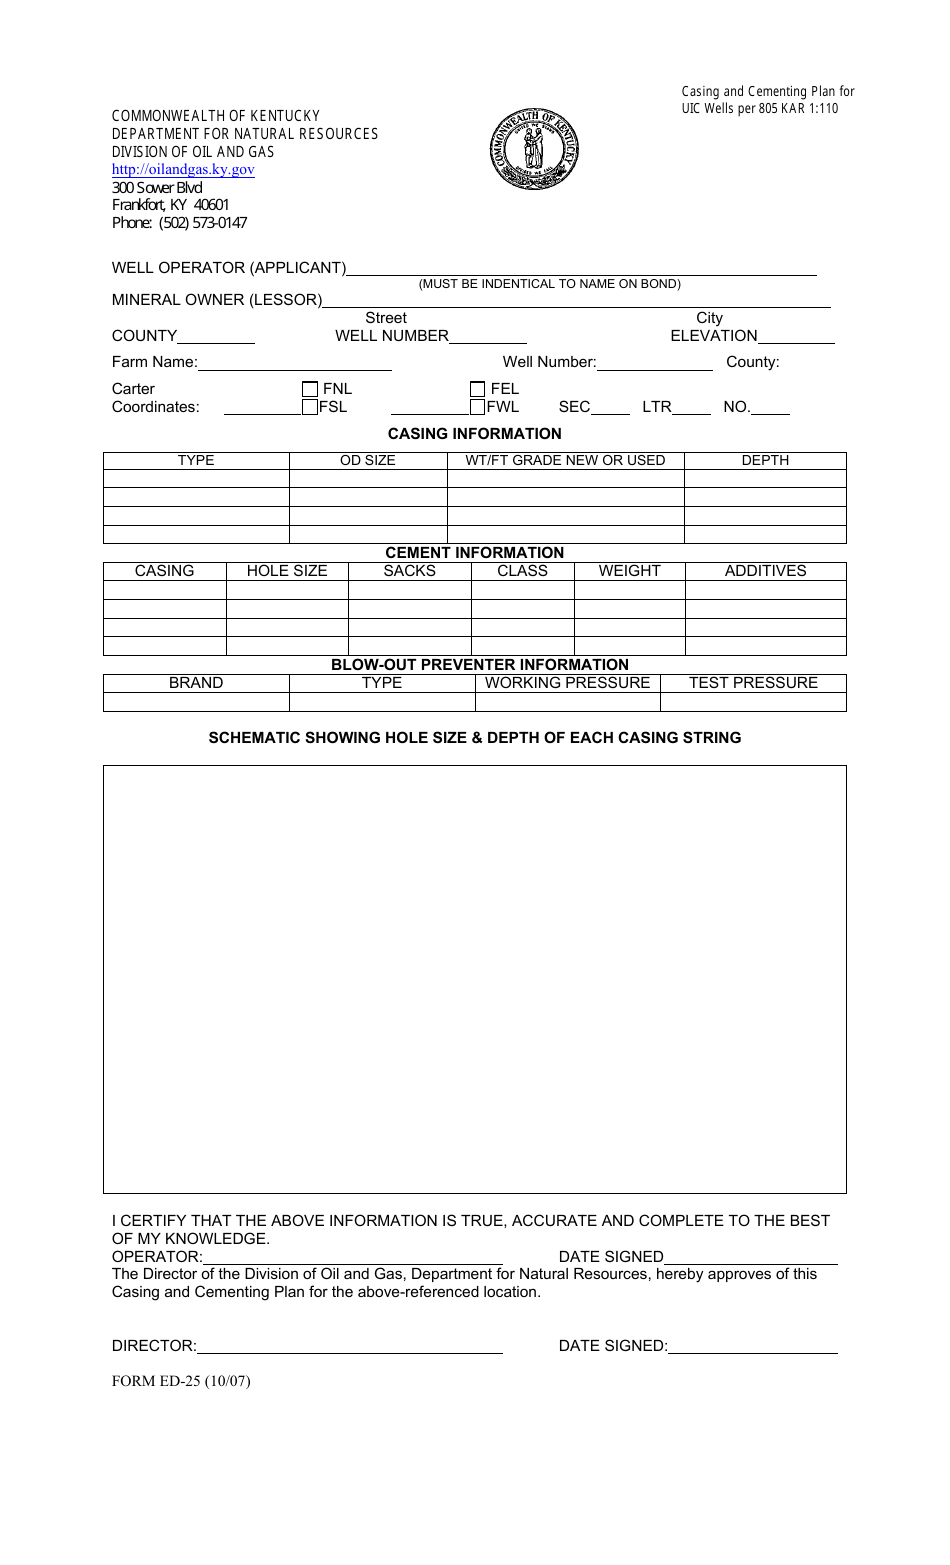 Form ED-25 Casing and Cementing Plan for Uic Wells - Kentucky, Page 1